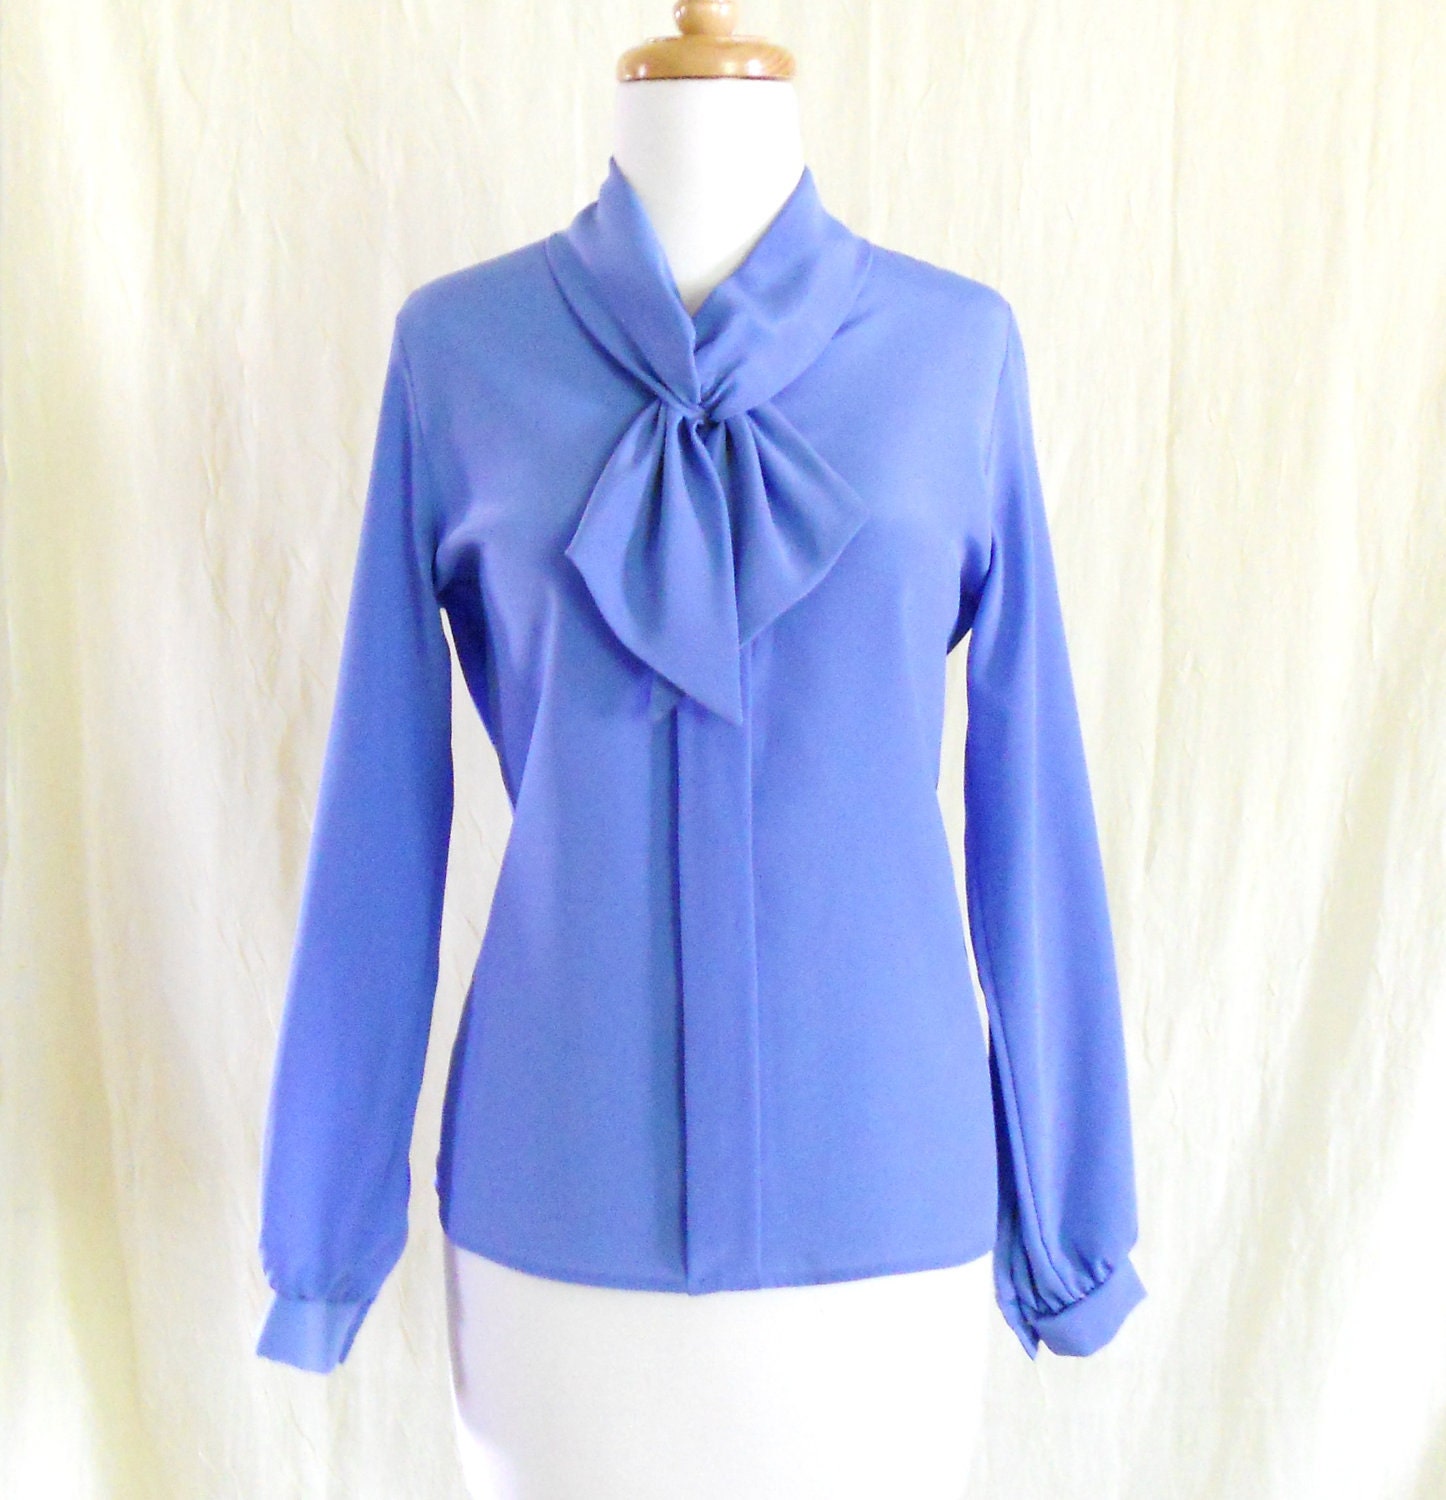 Vintage 1970s Periwinkle Blue Bow Tie Blouse Shirt Small